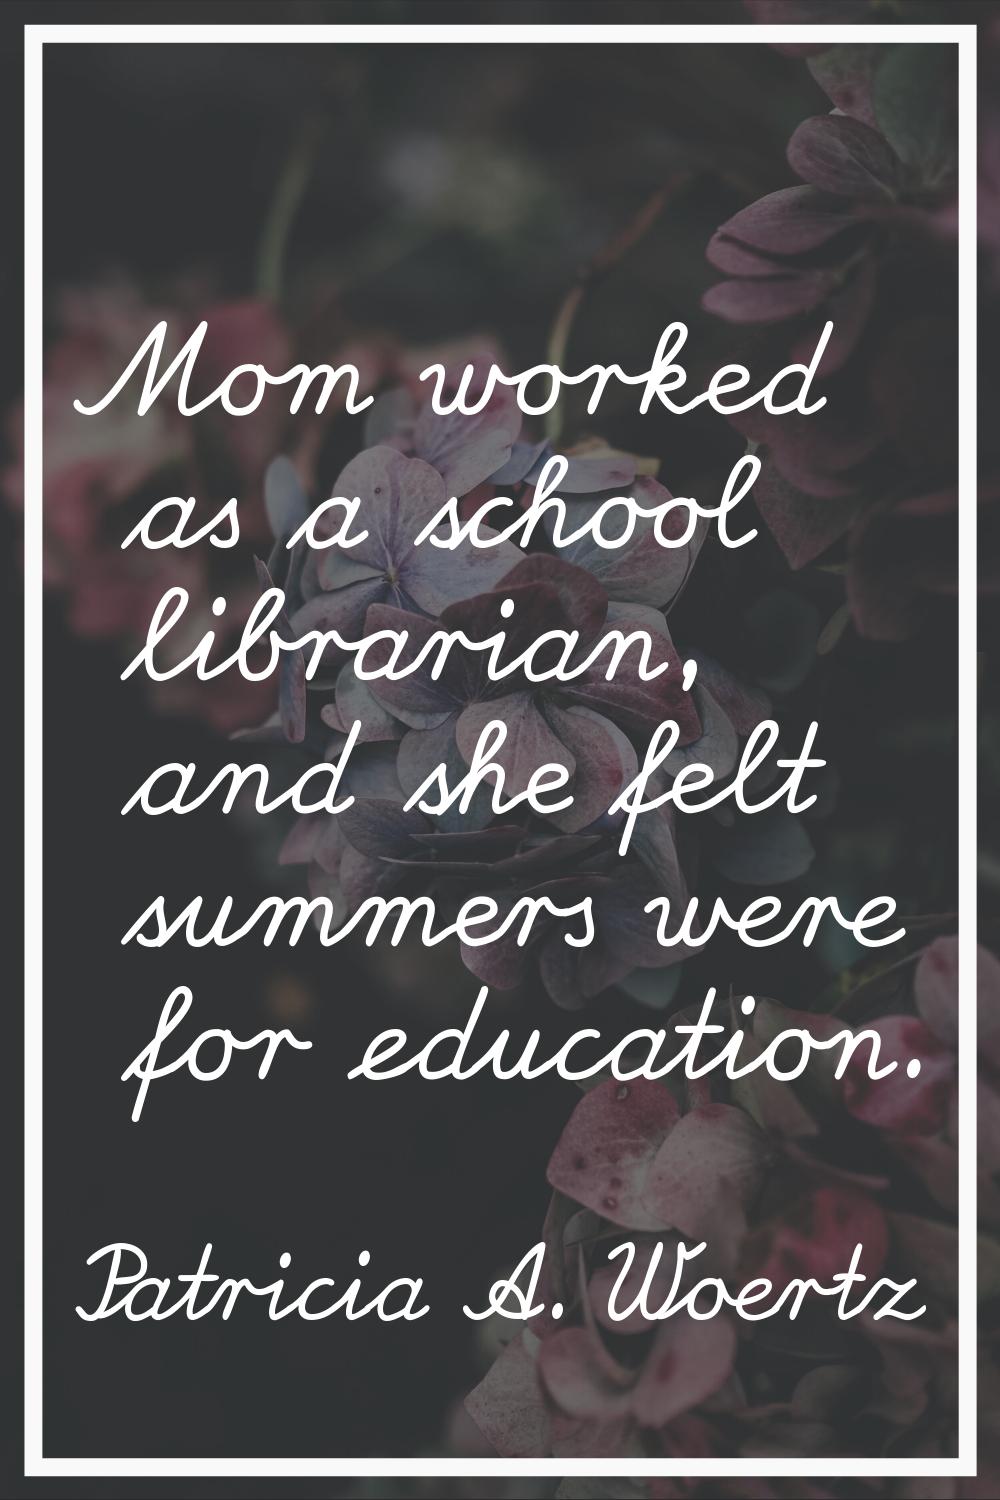 Mom worked as a school librarian, and she felt summers were for education.